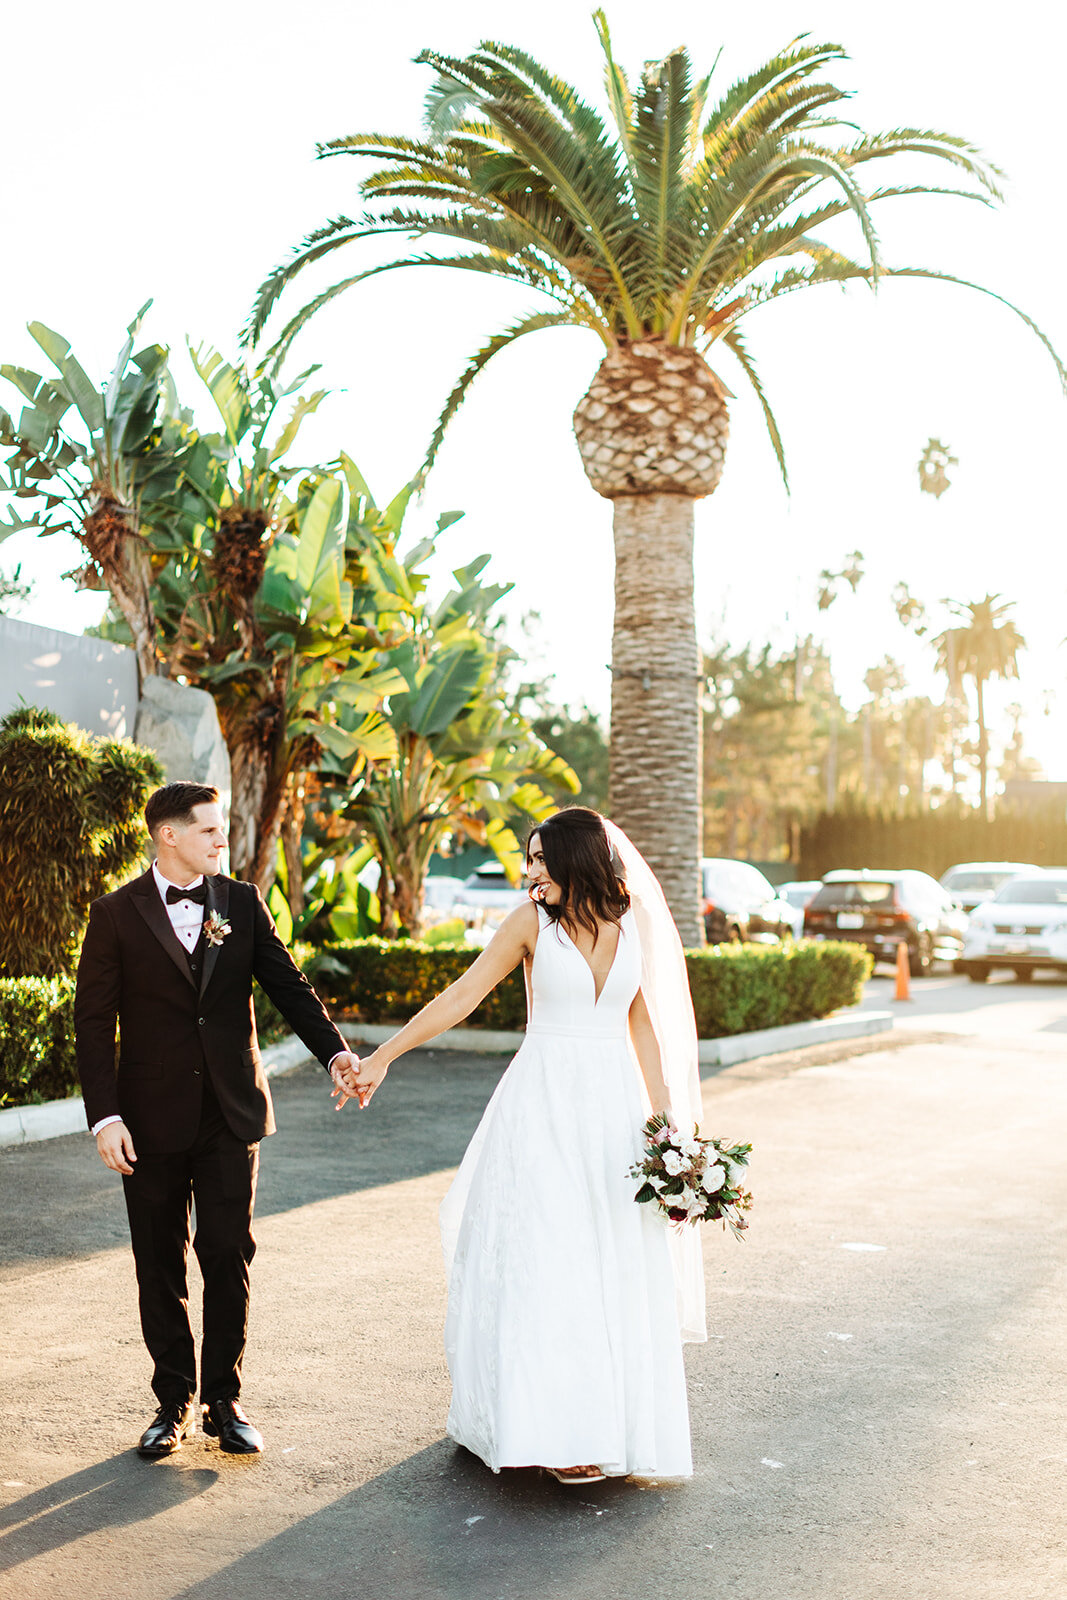 Colony house in Anaheim, CA wedding photography; groom taking his bride with him